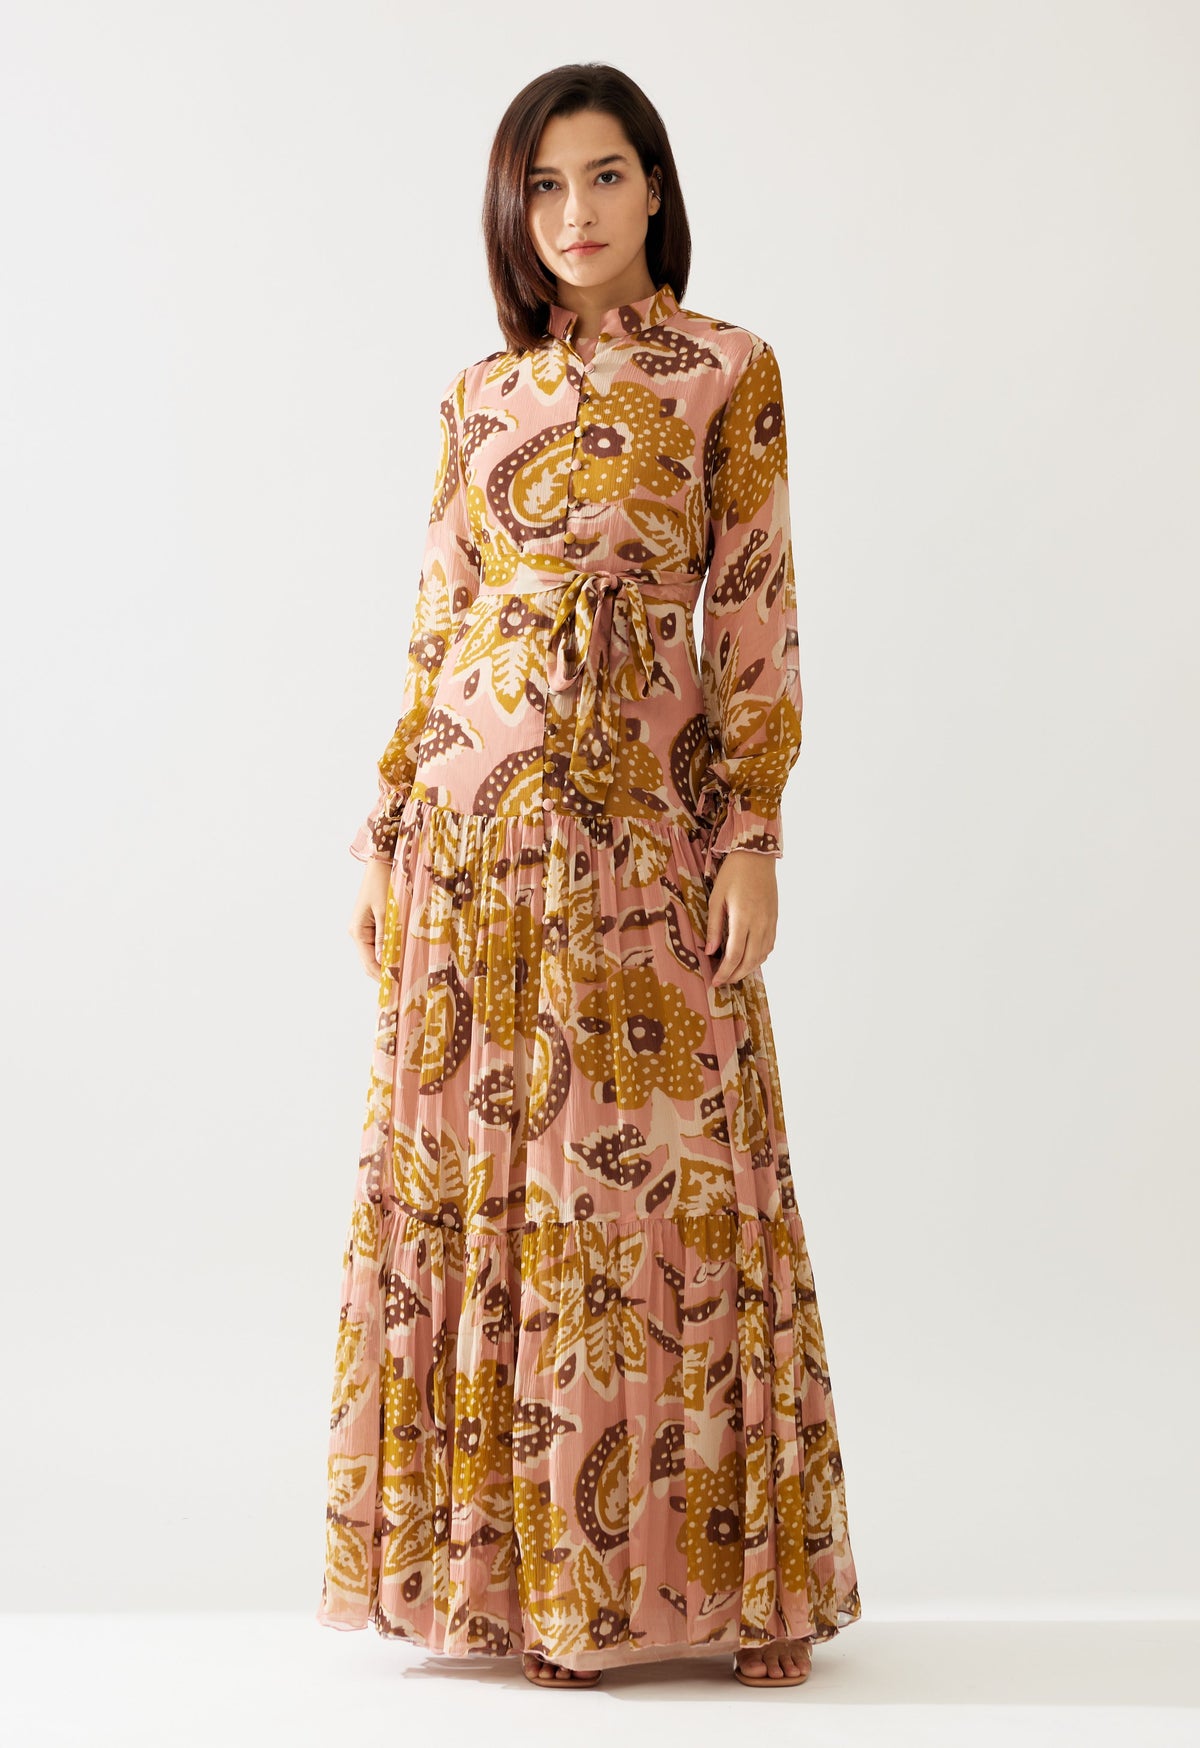 PINK AND MUSTARD FLORAL LONG DRESS